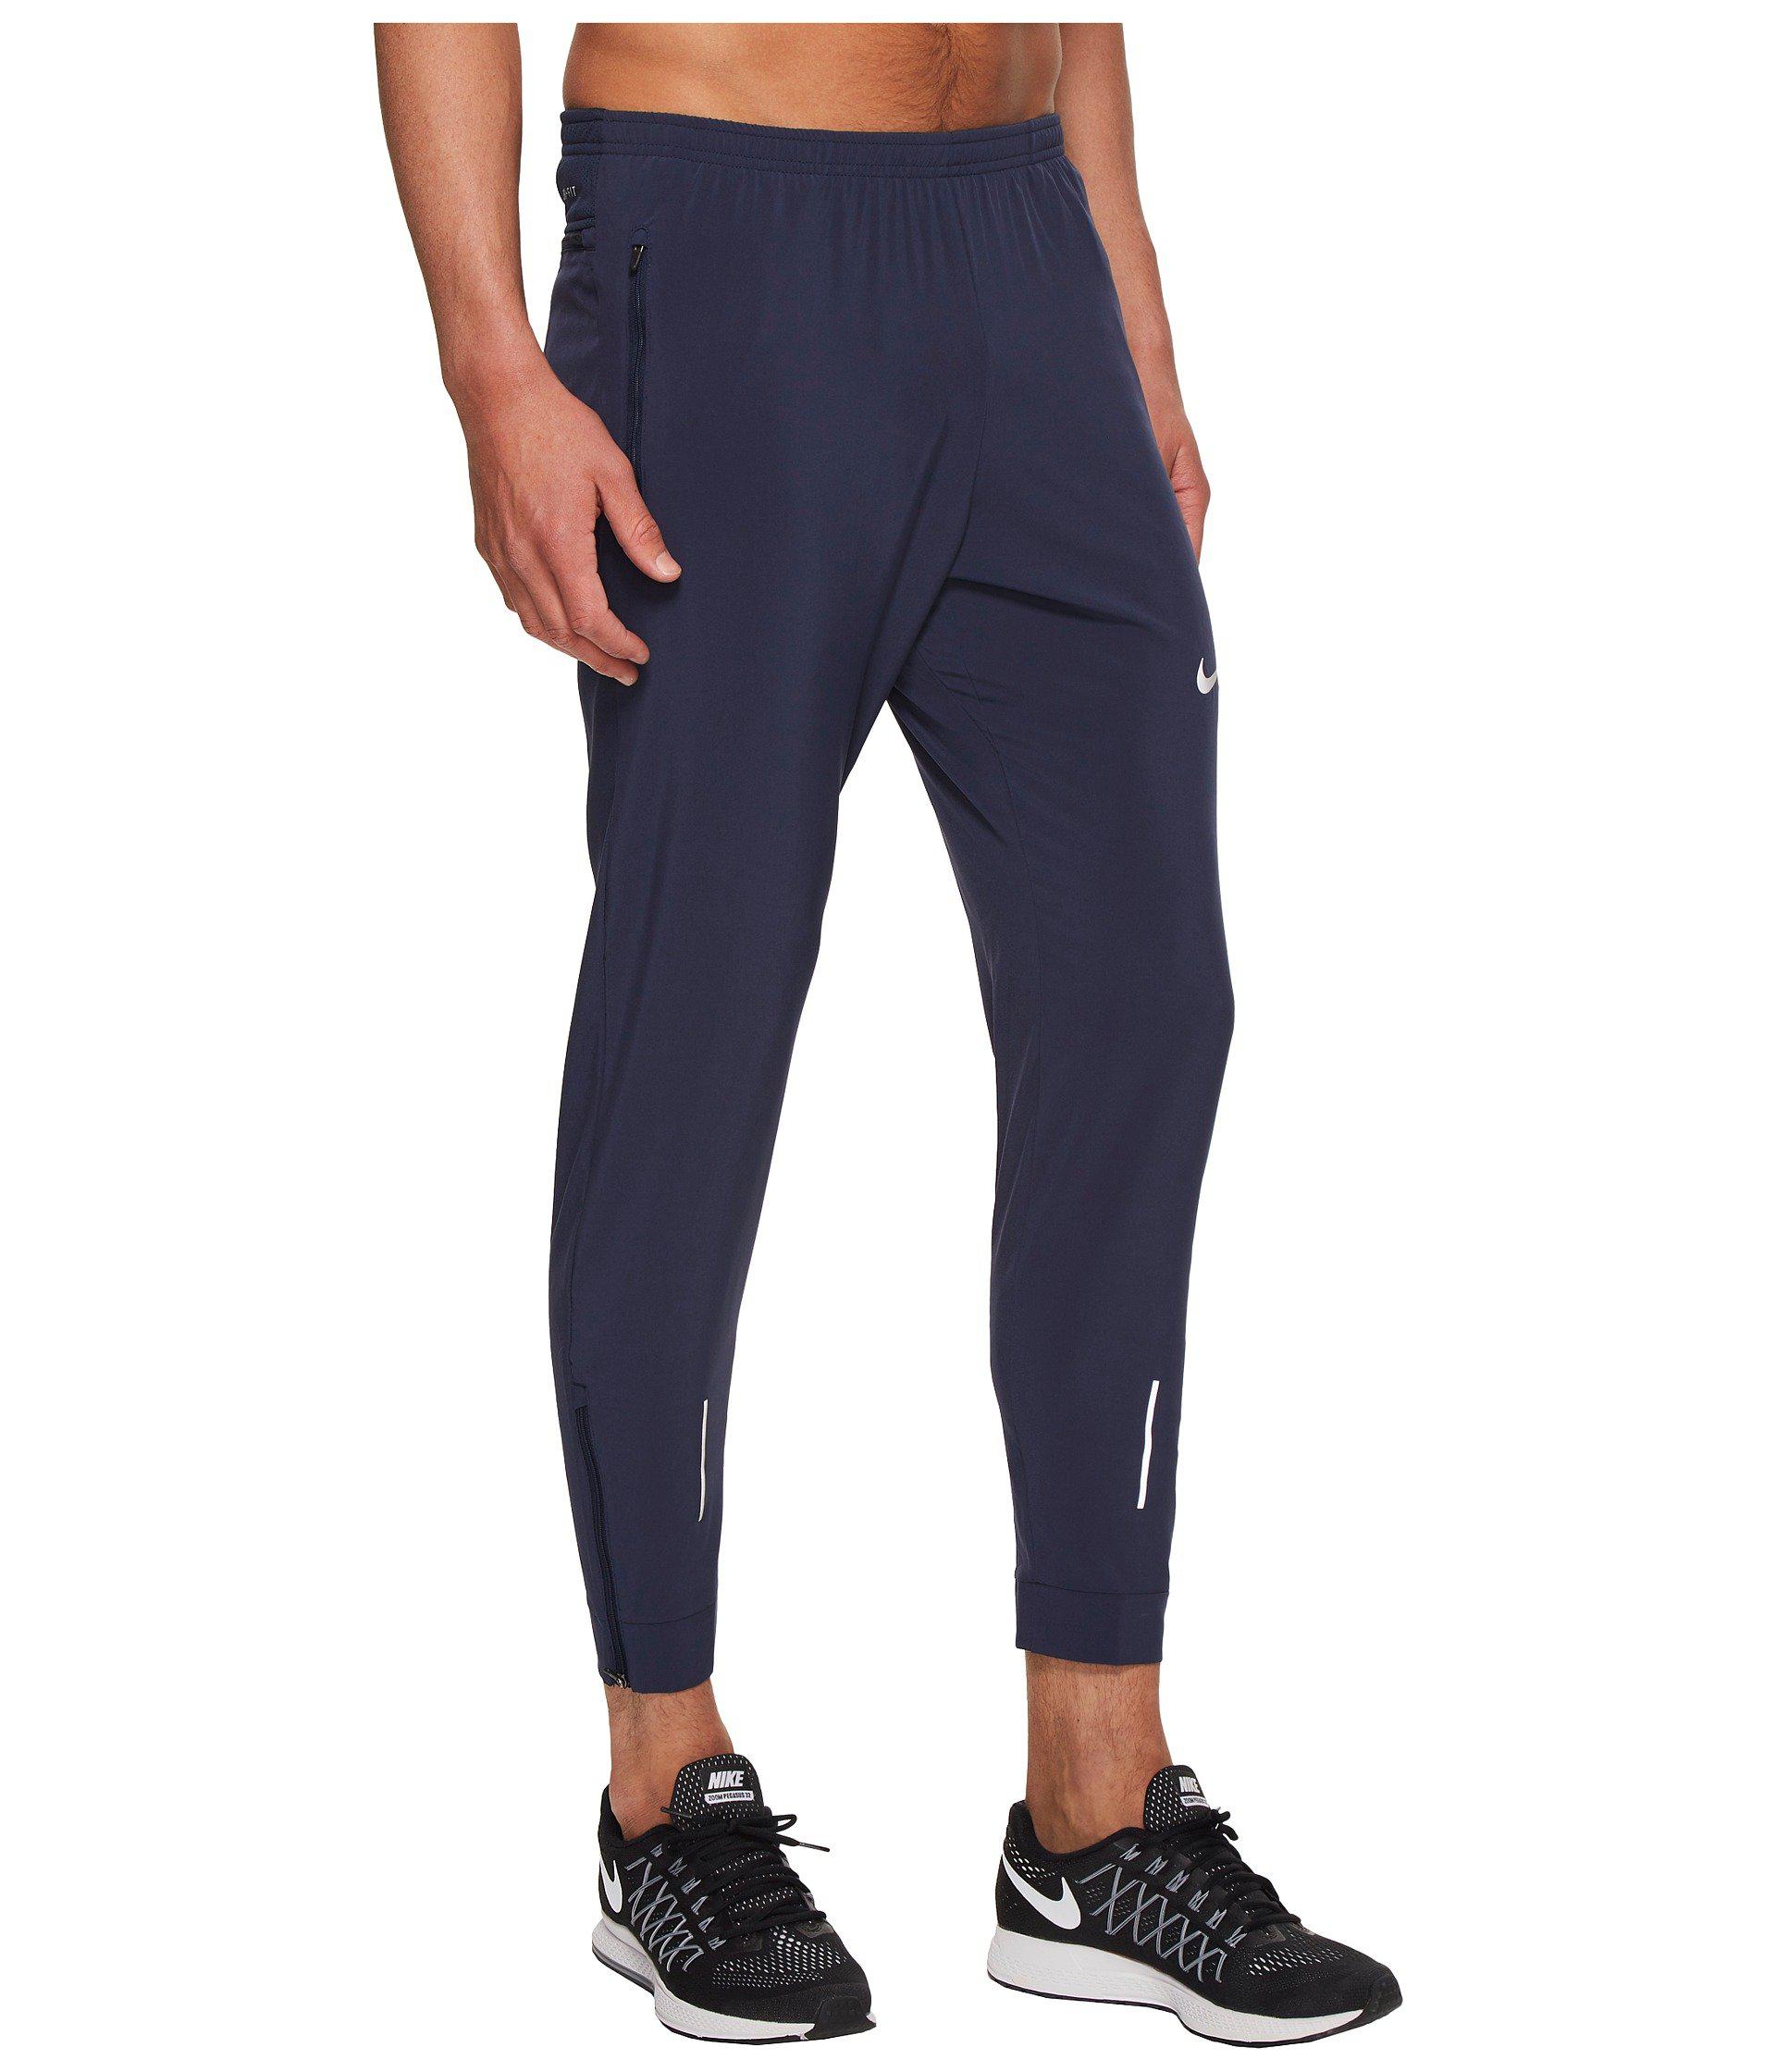 Nike Synthetic Flex Essential Running Pant in Blue for Men - Lyst